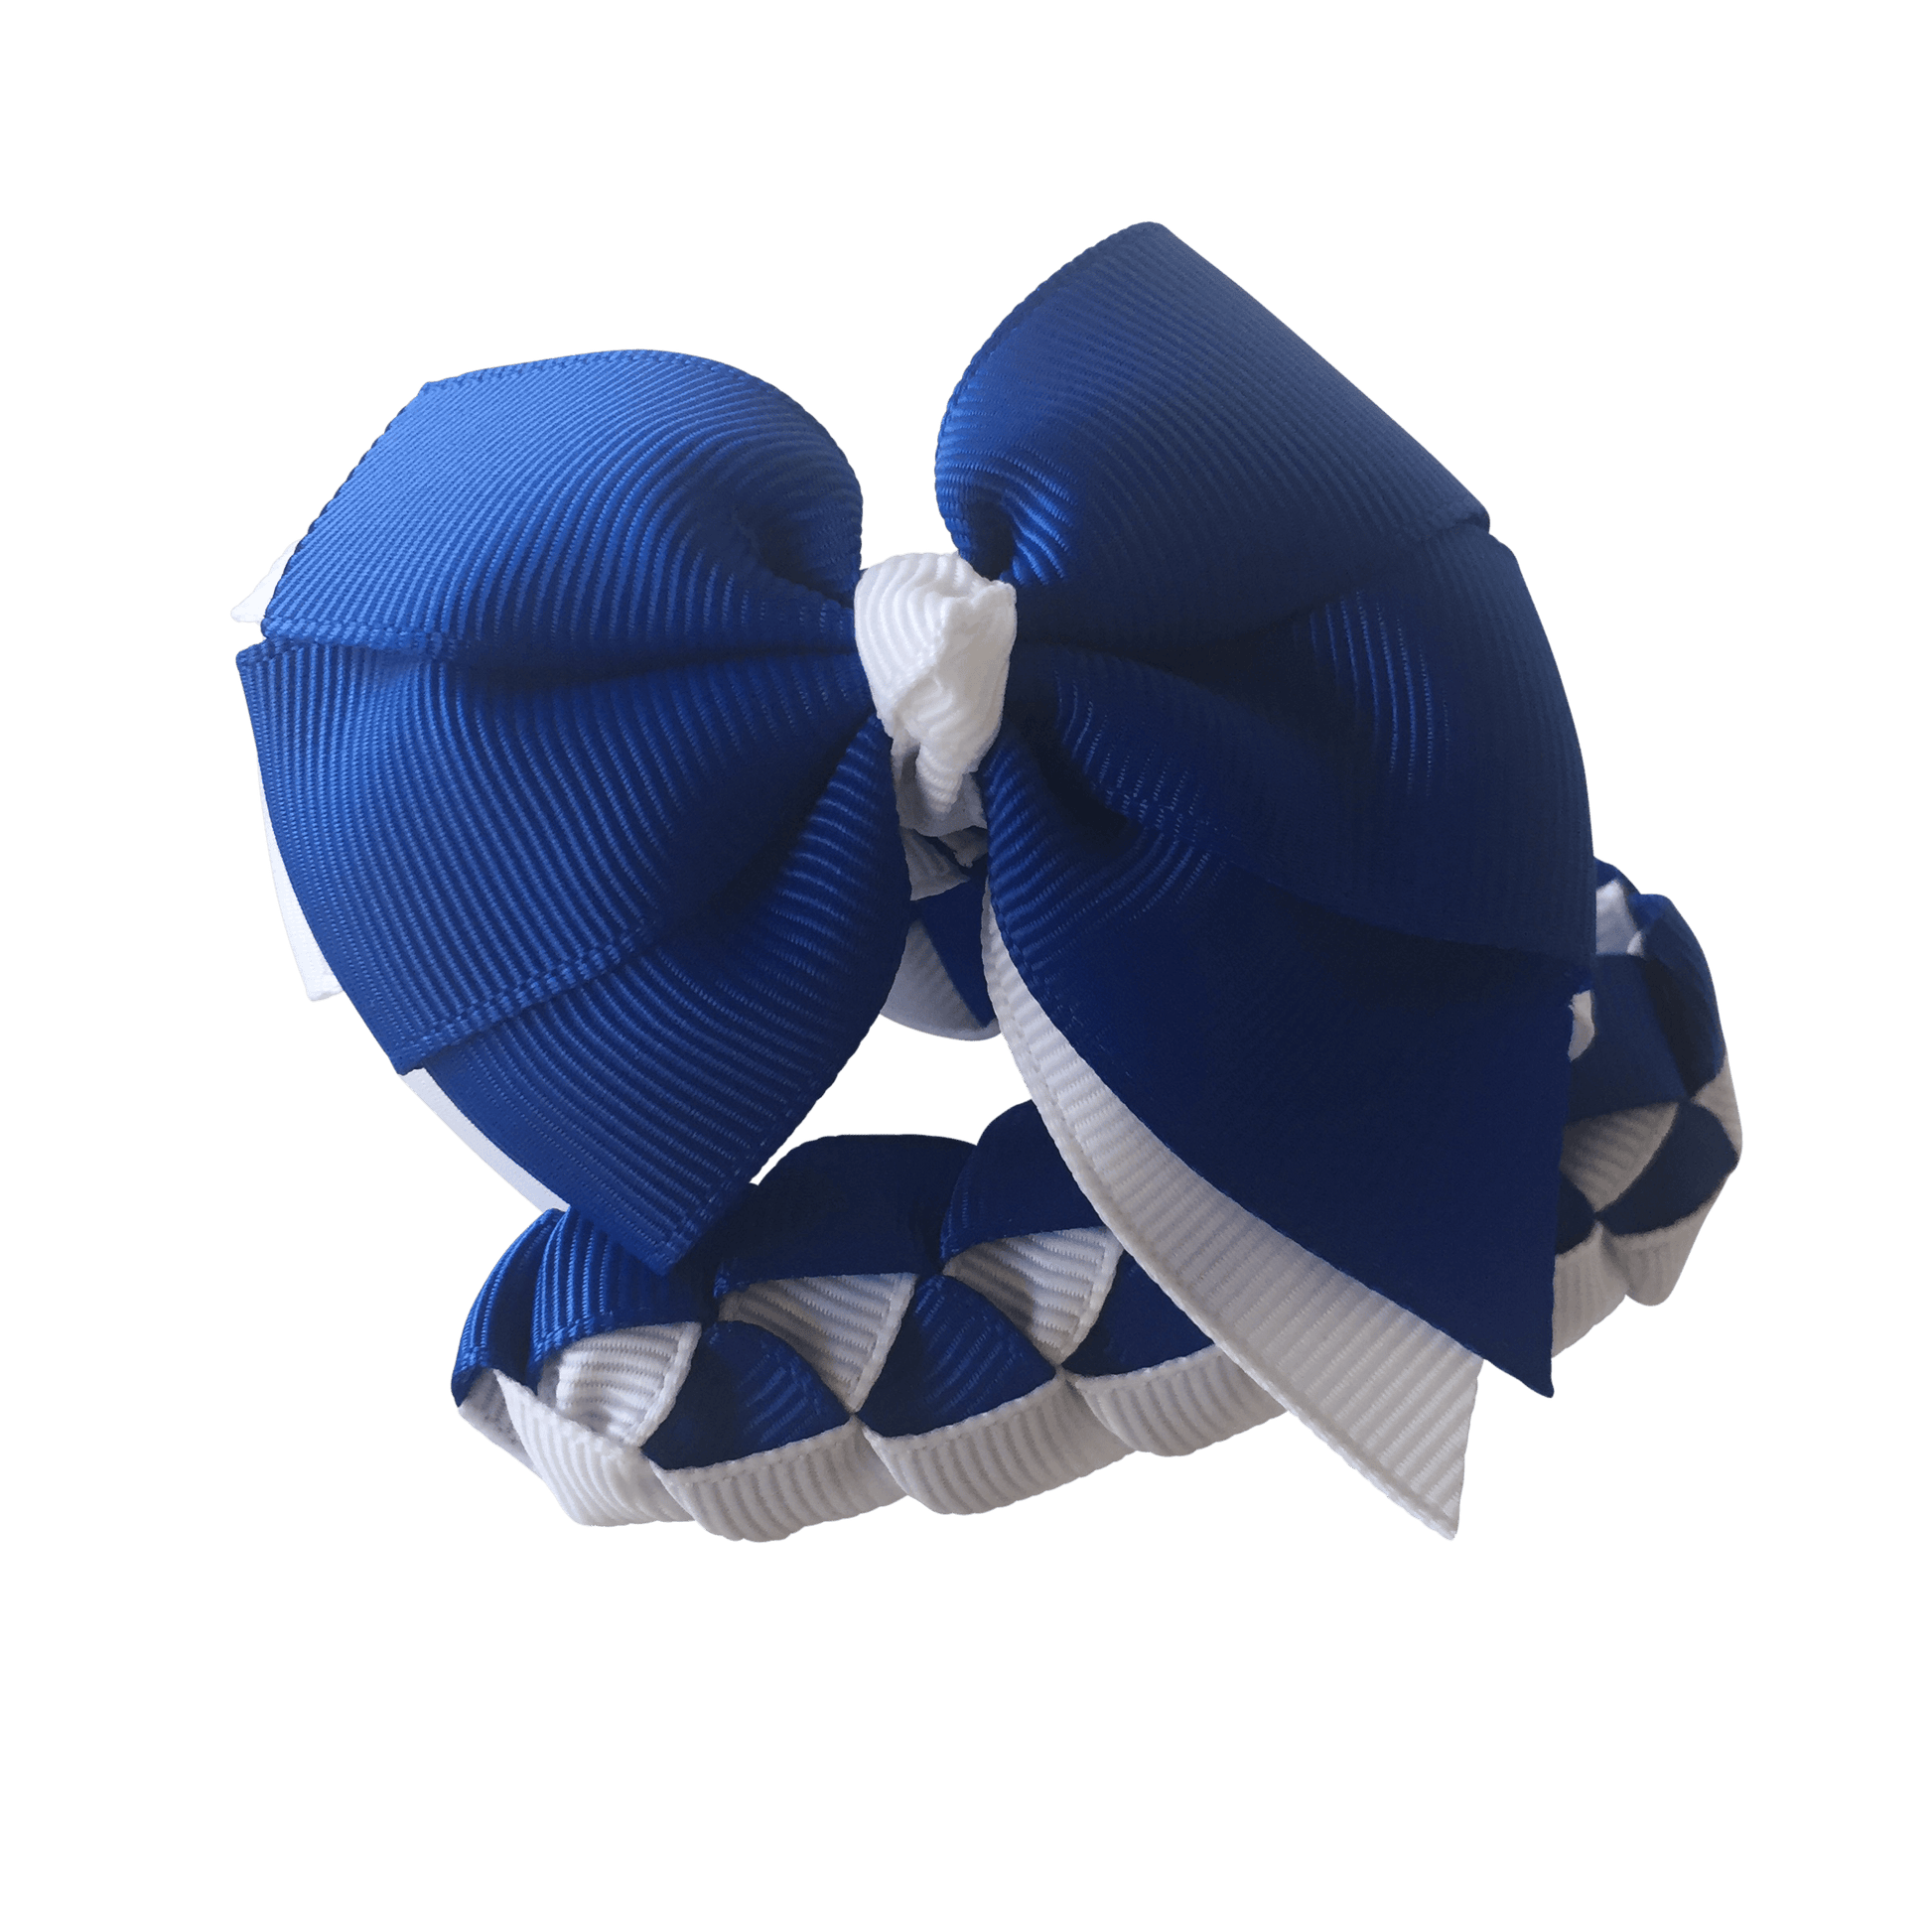 Royal Blue & White Hair Accessories - Ponytails and Fairytales